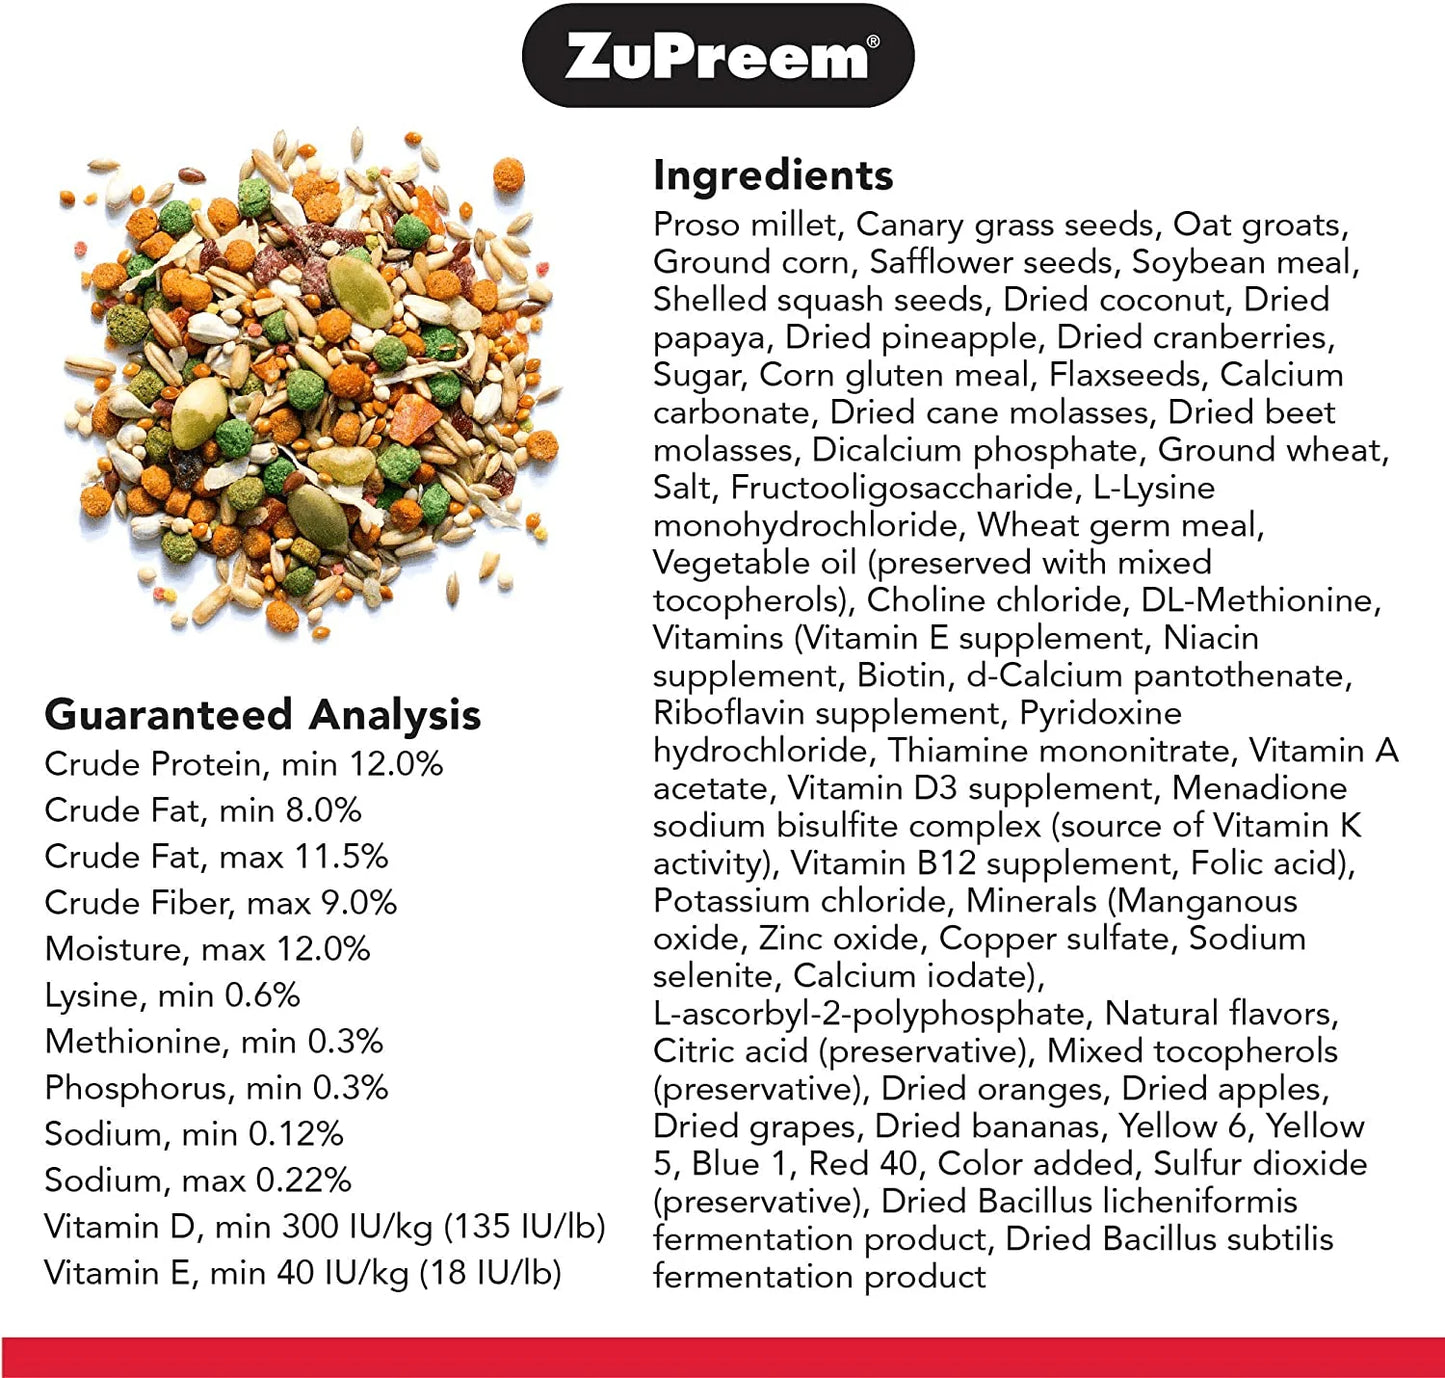 Zupreem Smart Selects Bird Food for Medium Birds (Single & 2-Pack) - Everyday Feeding for Cockatiels, Quakers, Lovebirds, Small Conures